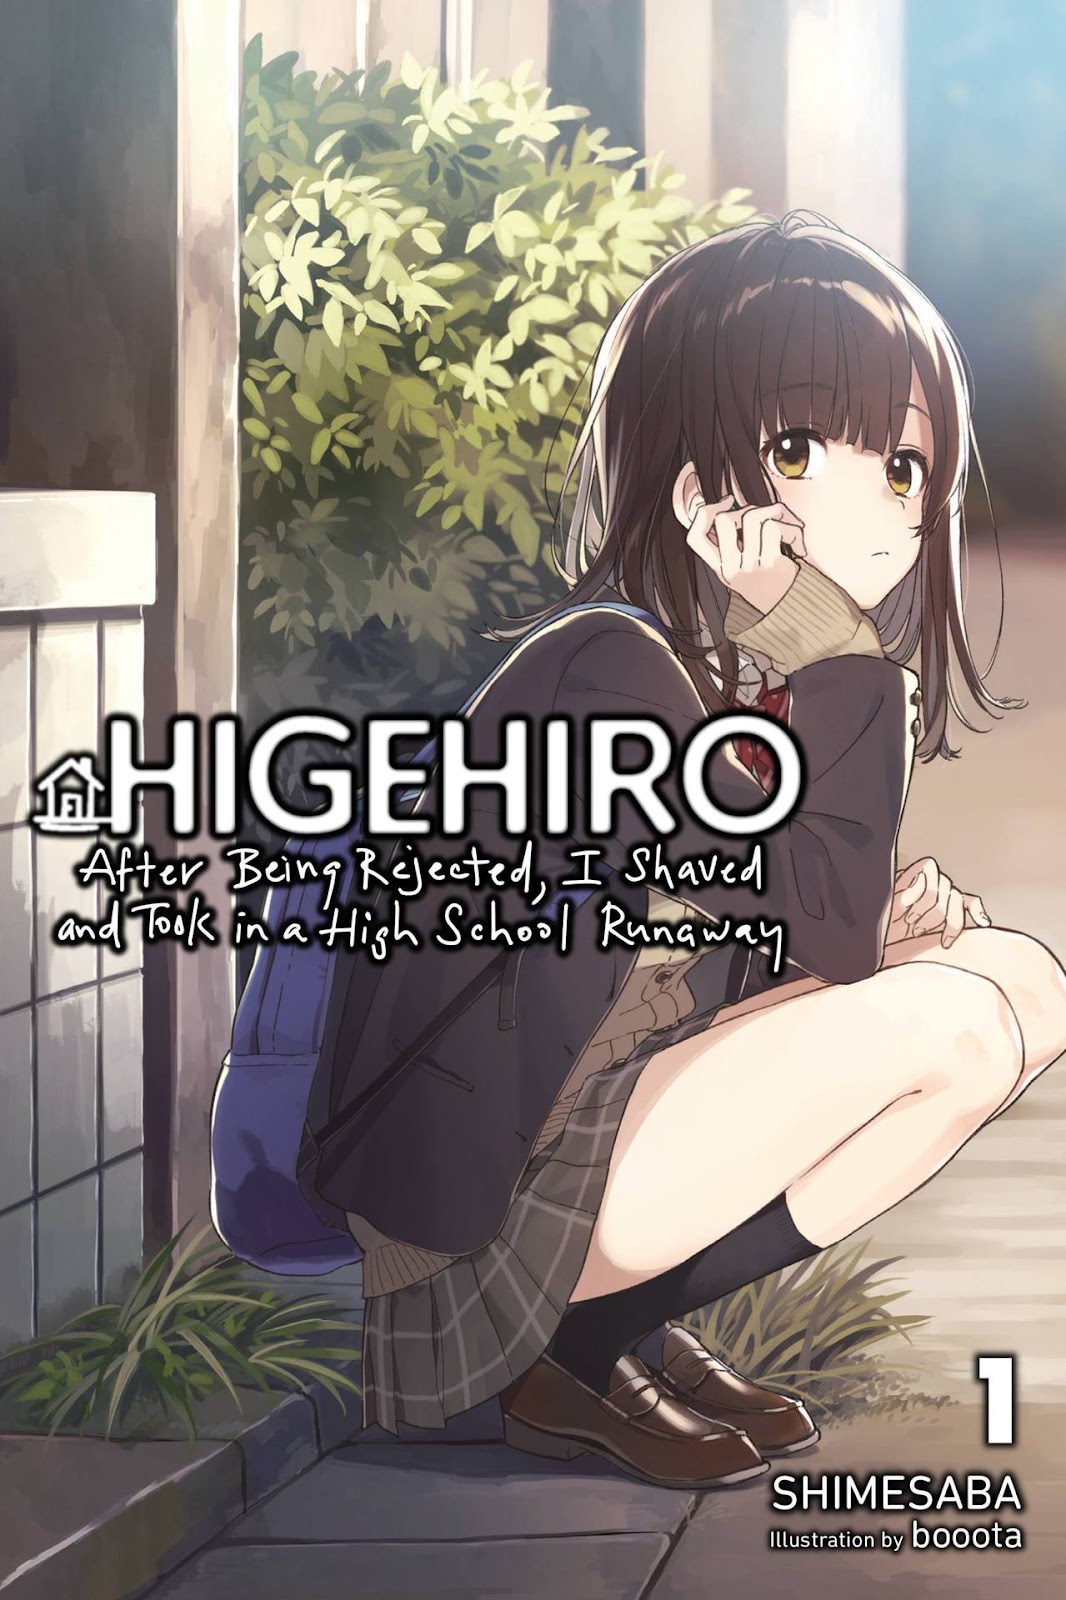 Higehiro: After Being Rejected, I Shaved and Took in a High School Runaway by Shimesaba. Illustration by booota. A high school girl sits on the side of a road looking glumly at the camera.